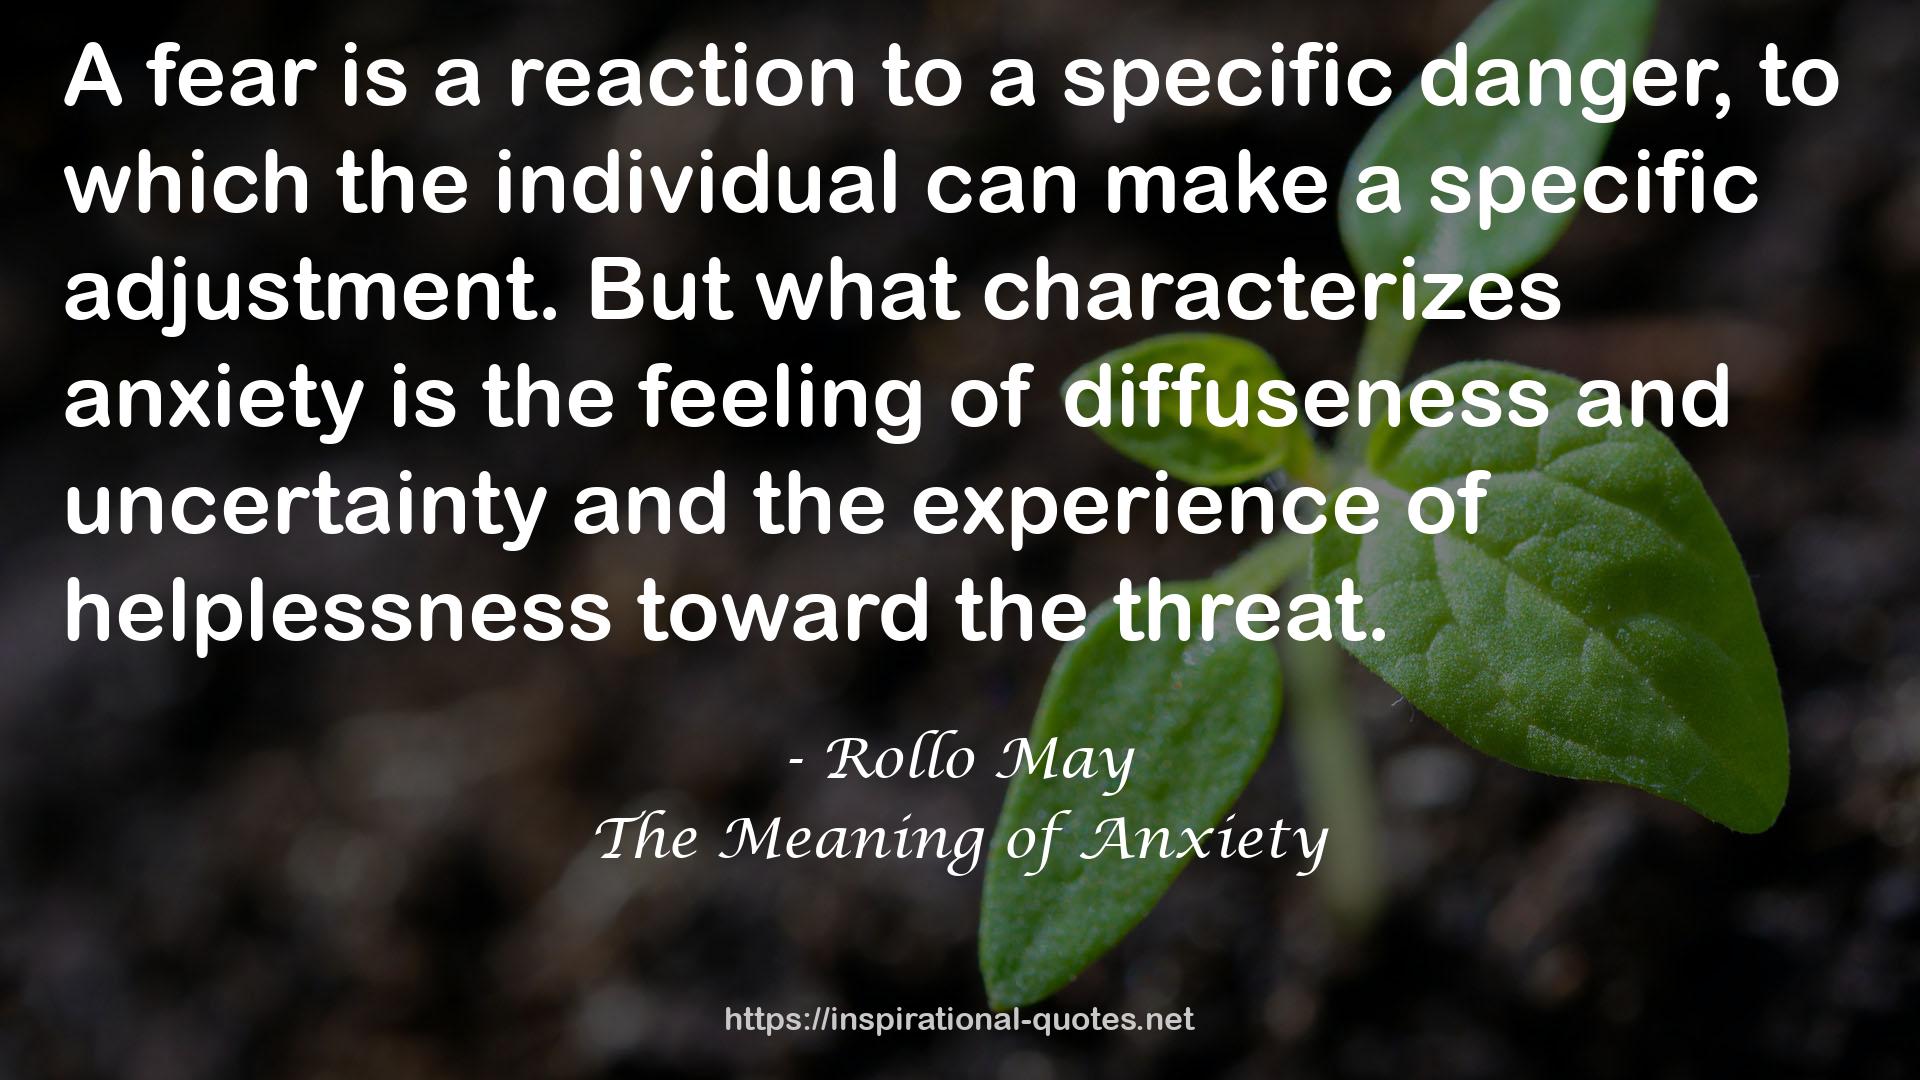 The Meaning of Anxiety QUOTES